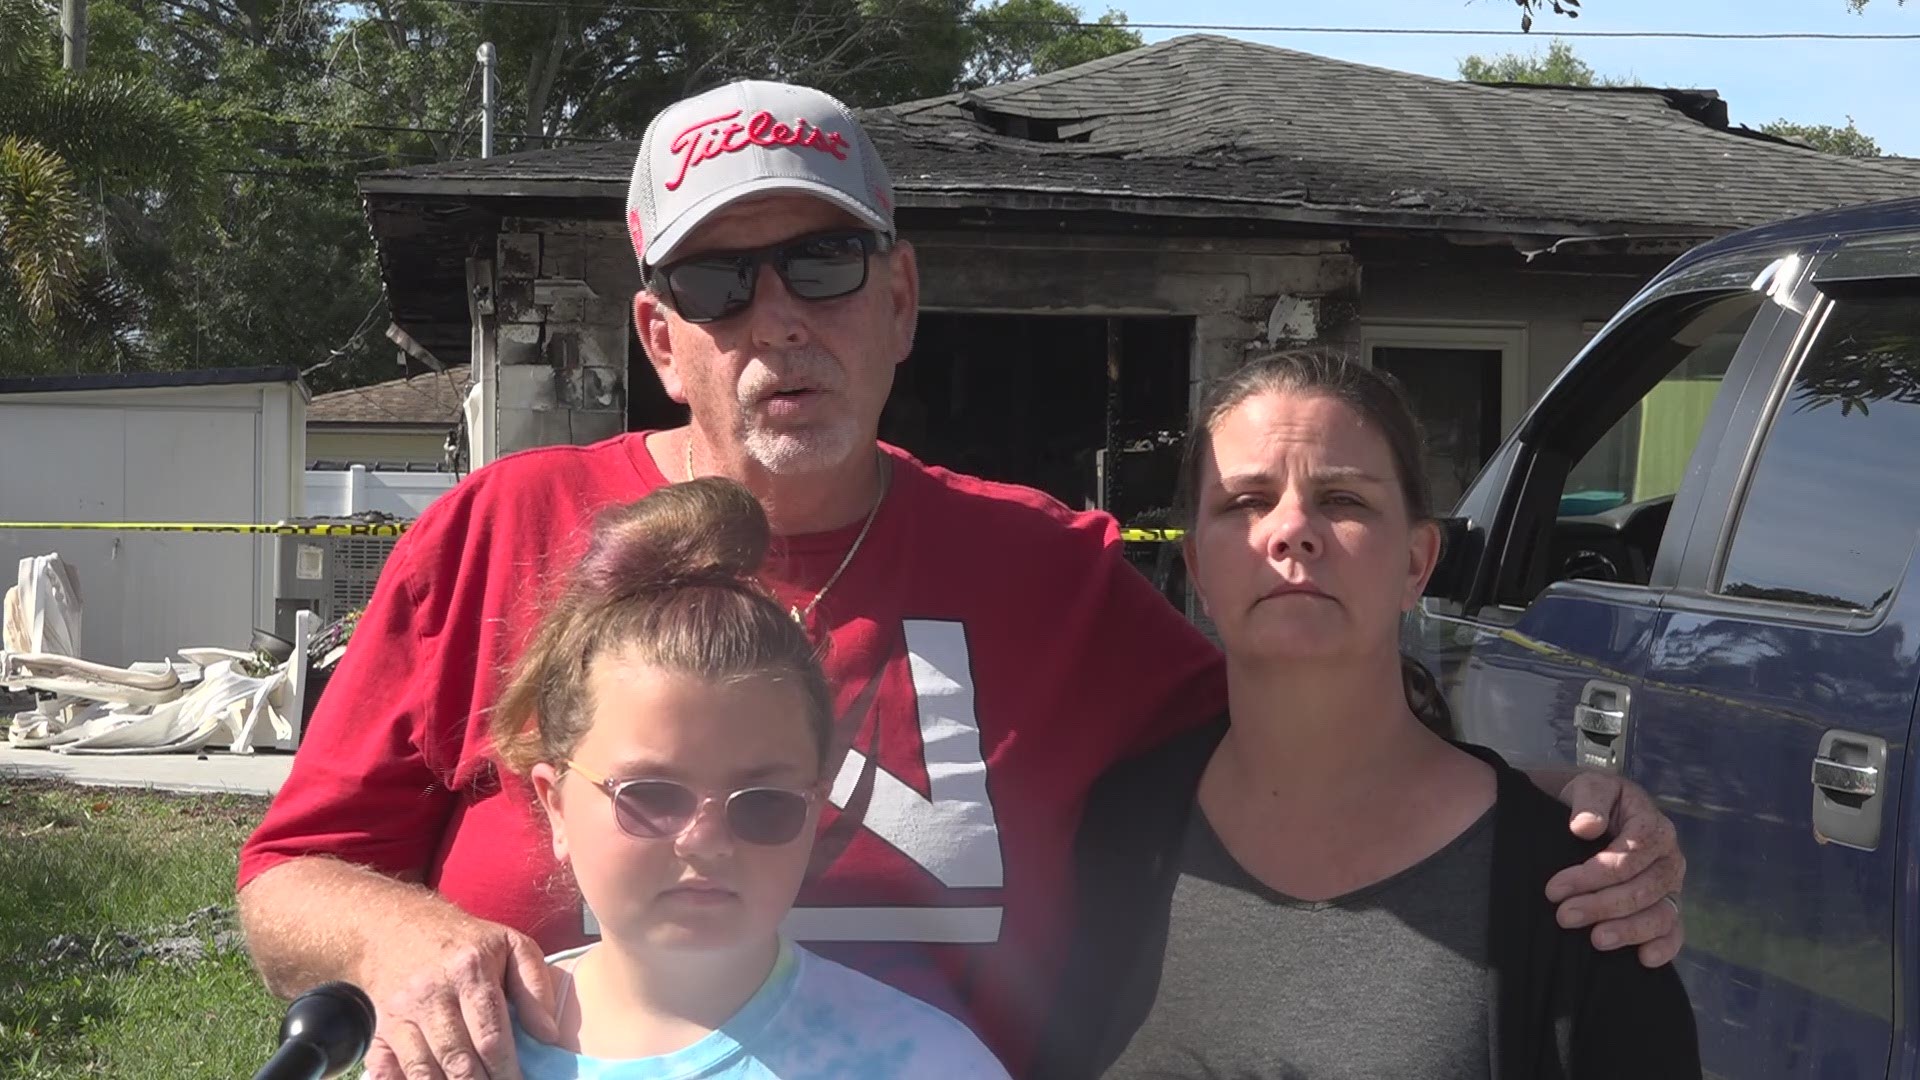 Bryan Cook and his family have been offered food, money, clothes, and shelter by neighbors and strangers since their home was burned down last week.